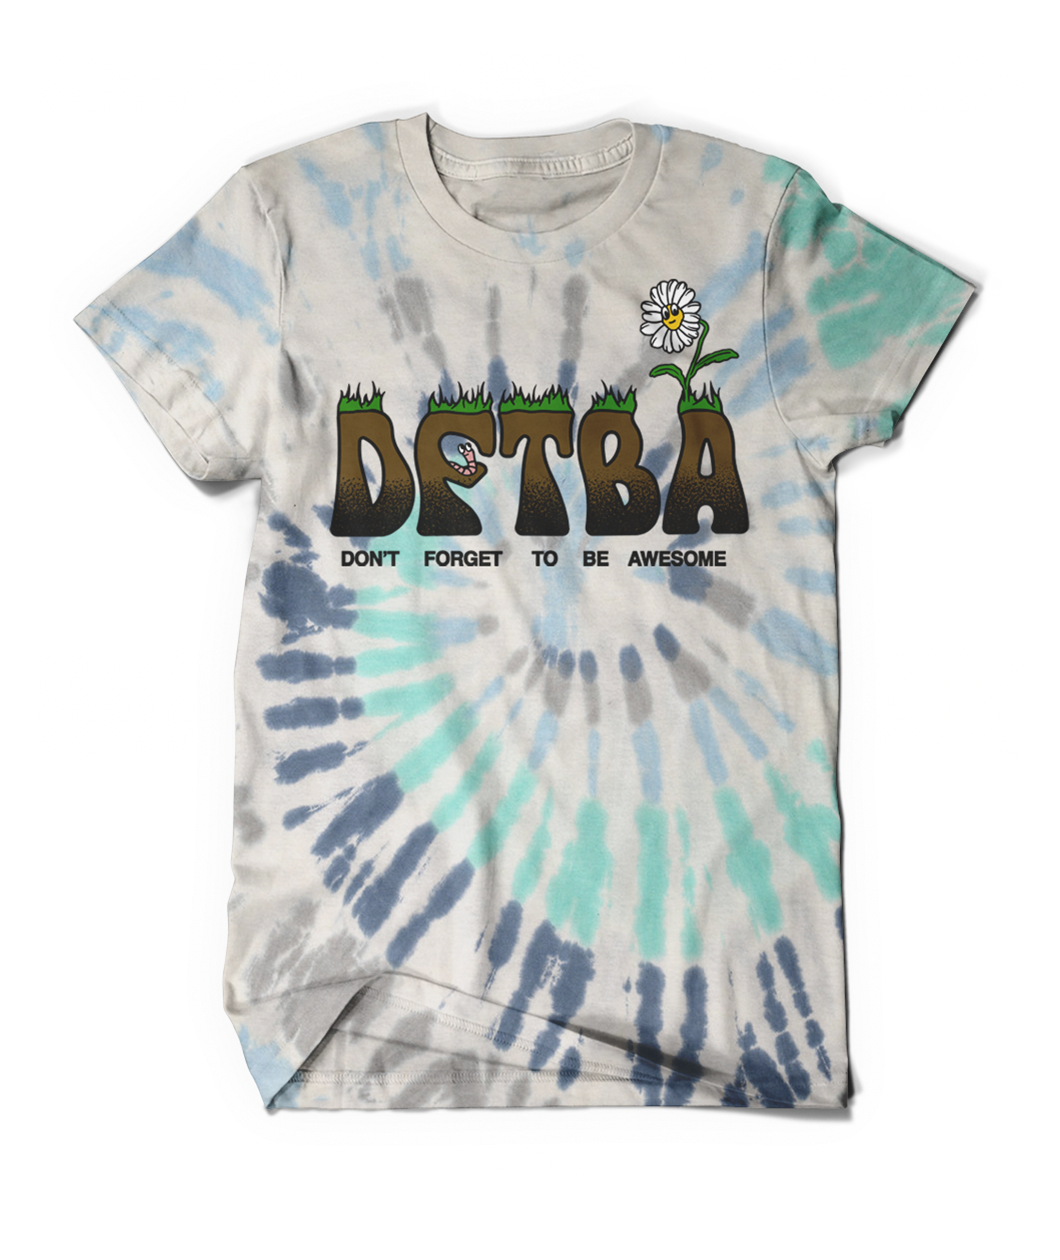 Tie dye shirt in a spiral with shades of blue with 